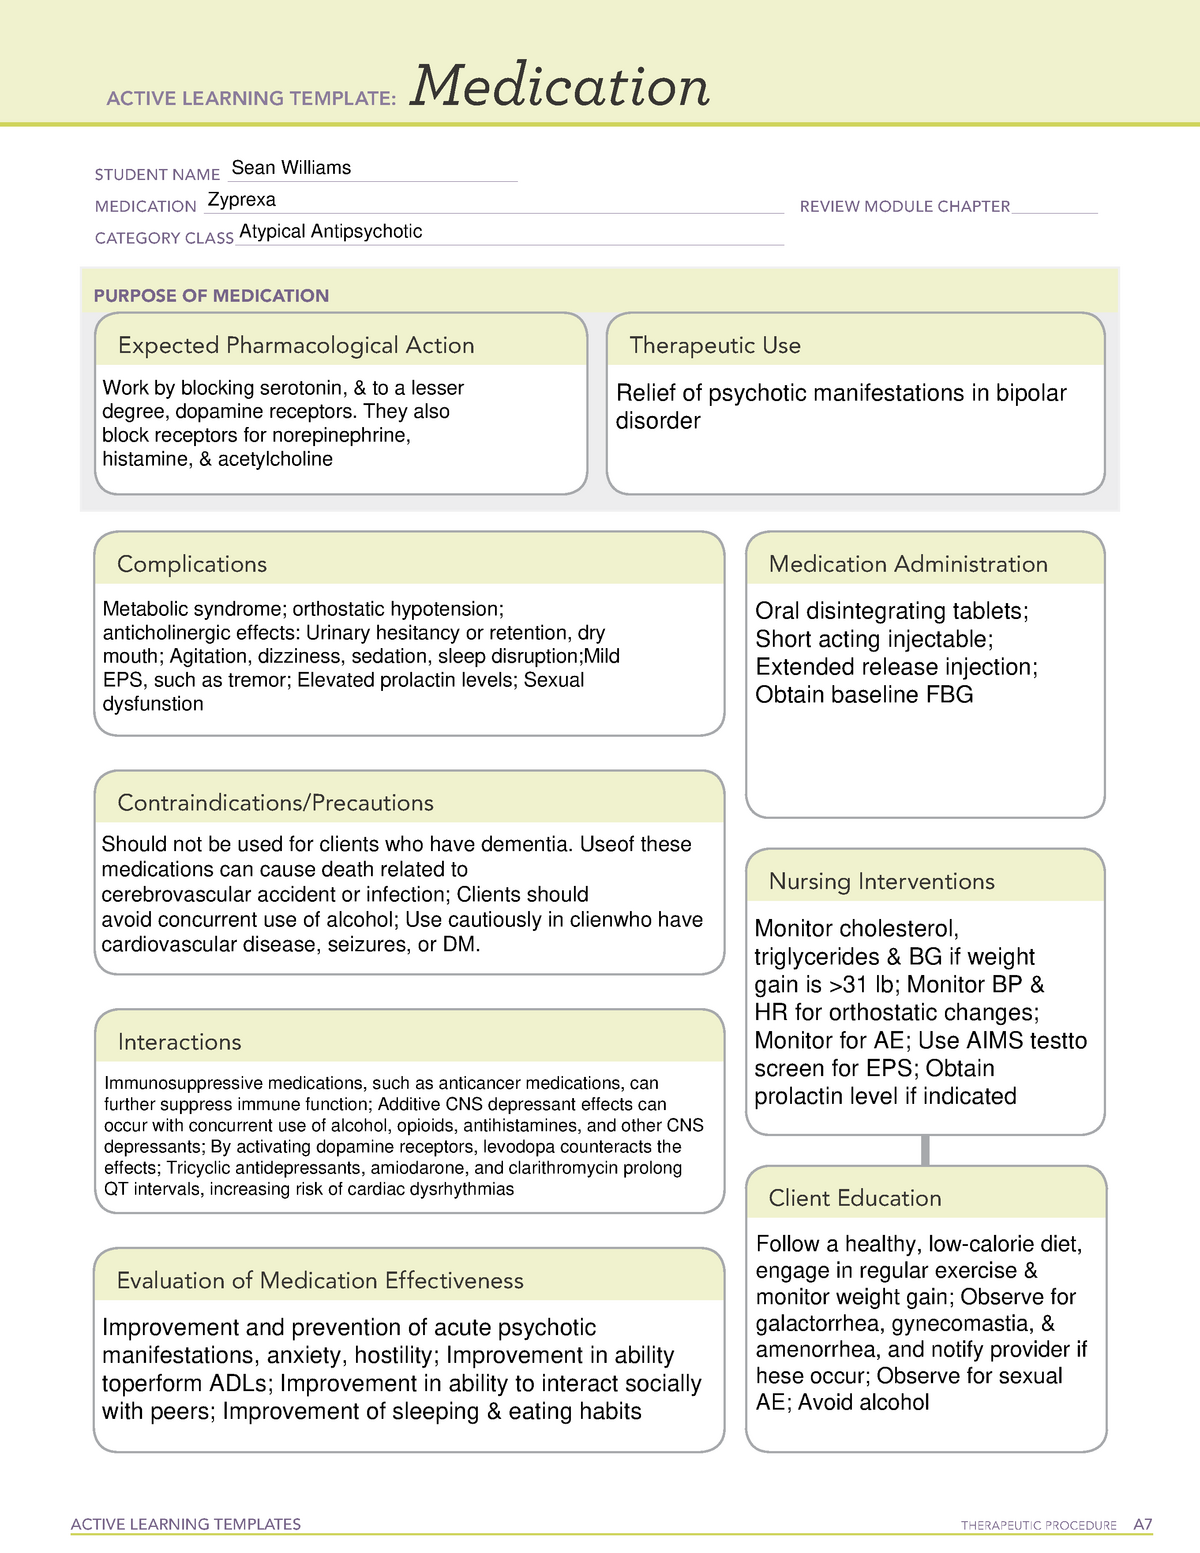 ATI Medication Template Zyprexa ACTIVE LEARNING TEMPLATES THERAPEUTIC